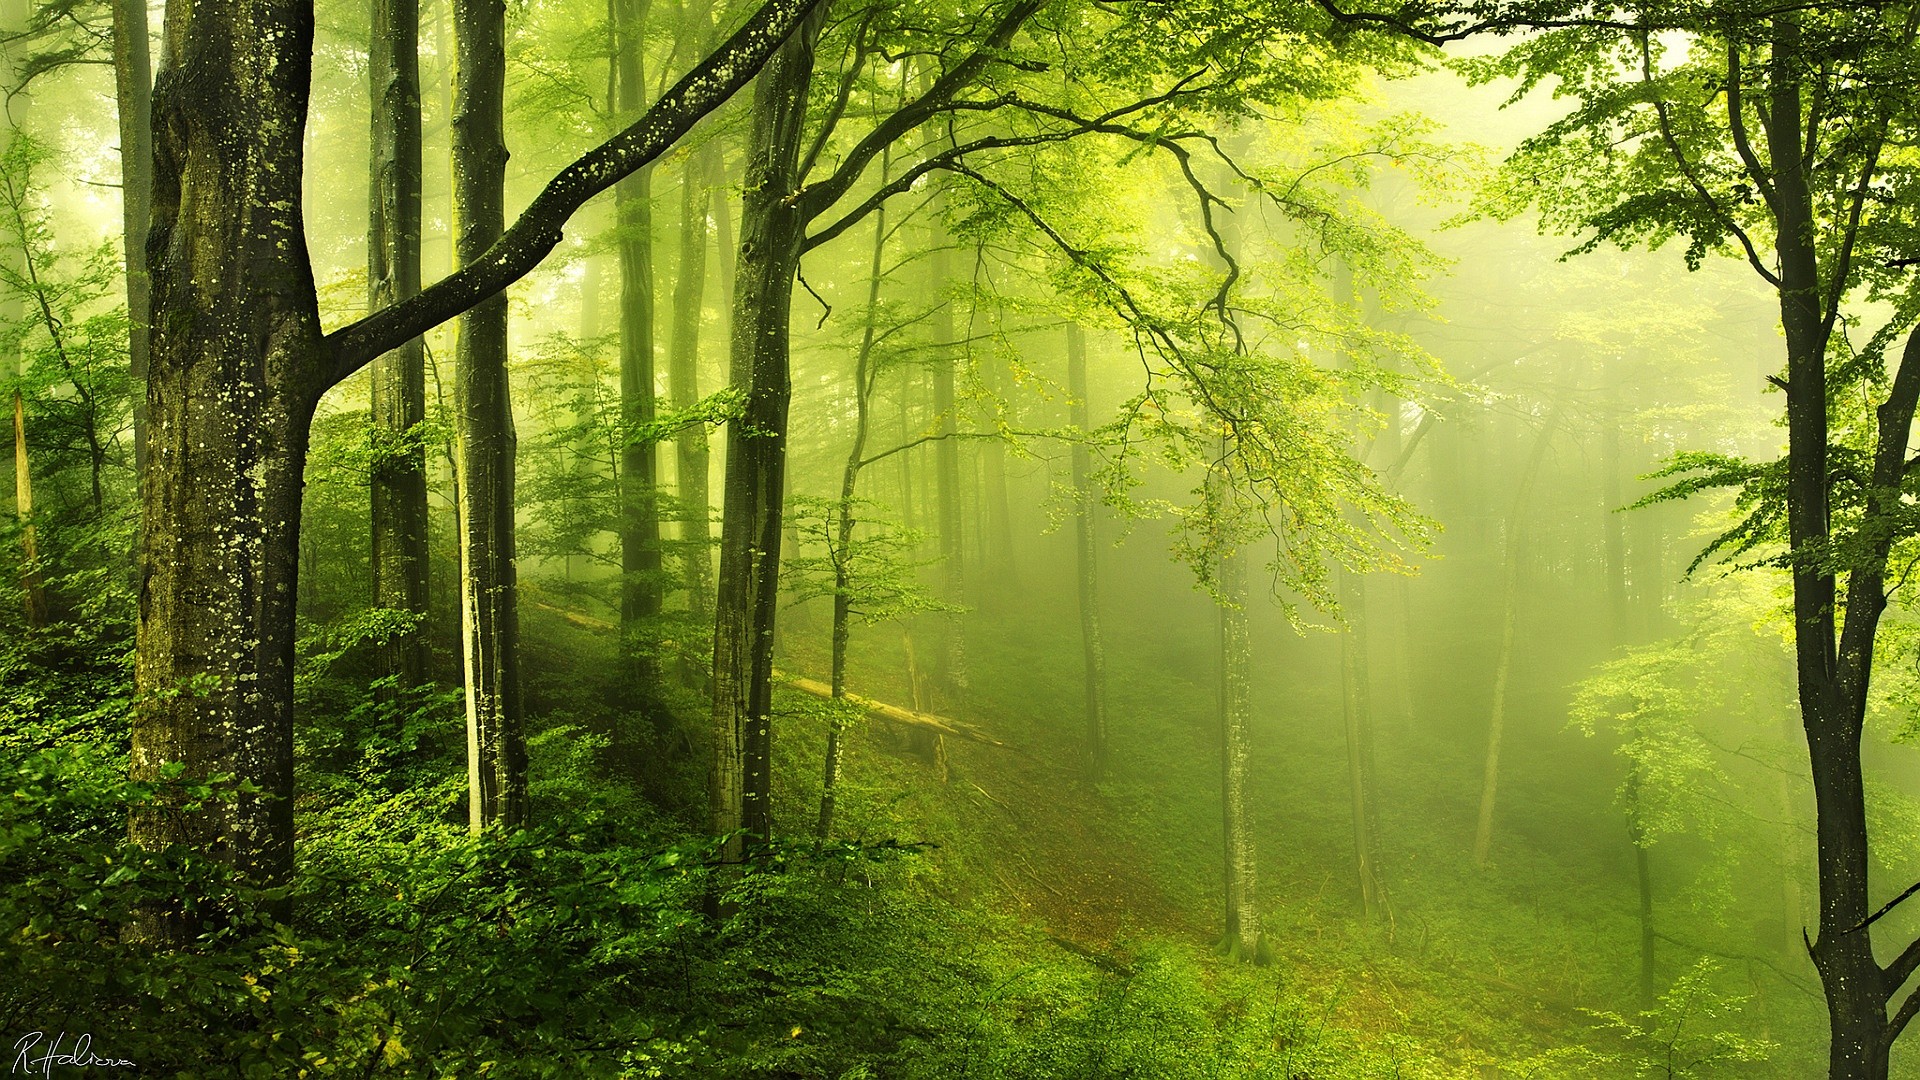 General 1920x1080 nature landscape trees wood forest leaves branch moss green mist signature